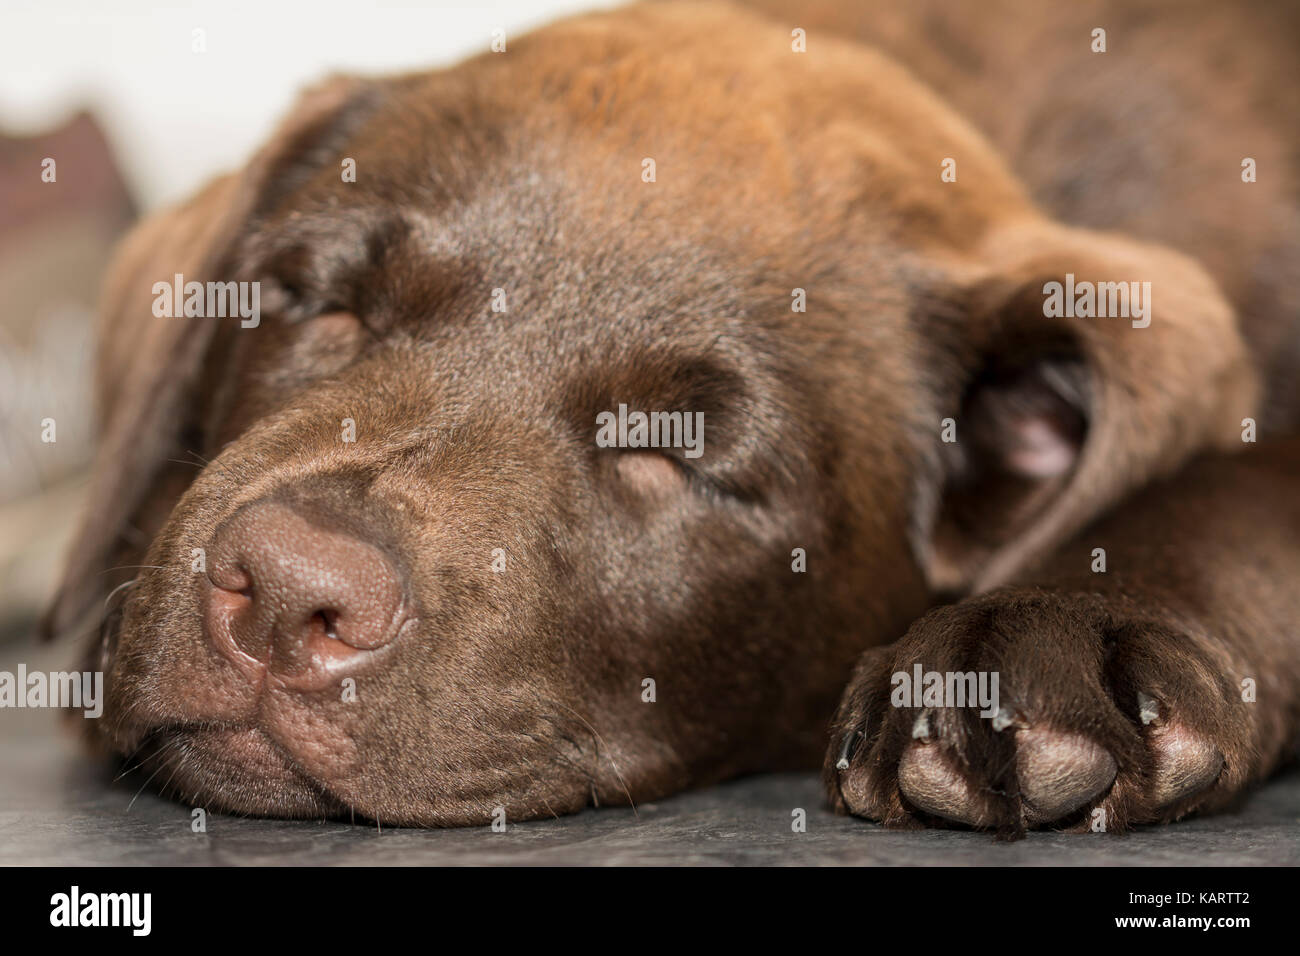 Closeup view of a 3-month-old Chocolate Labrador sleeping on a tiled floor in the kitchen Stock Photo